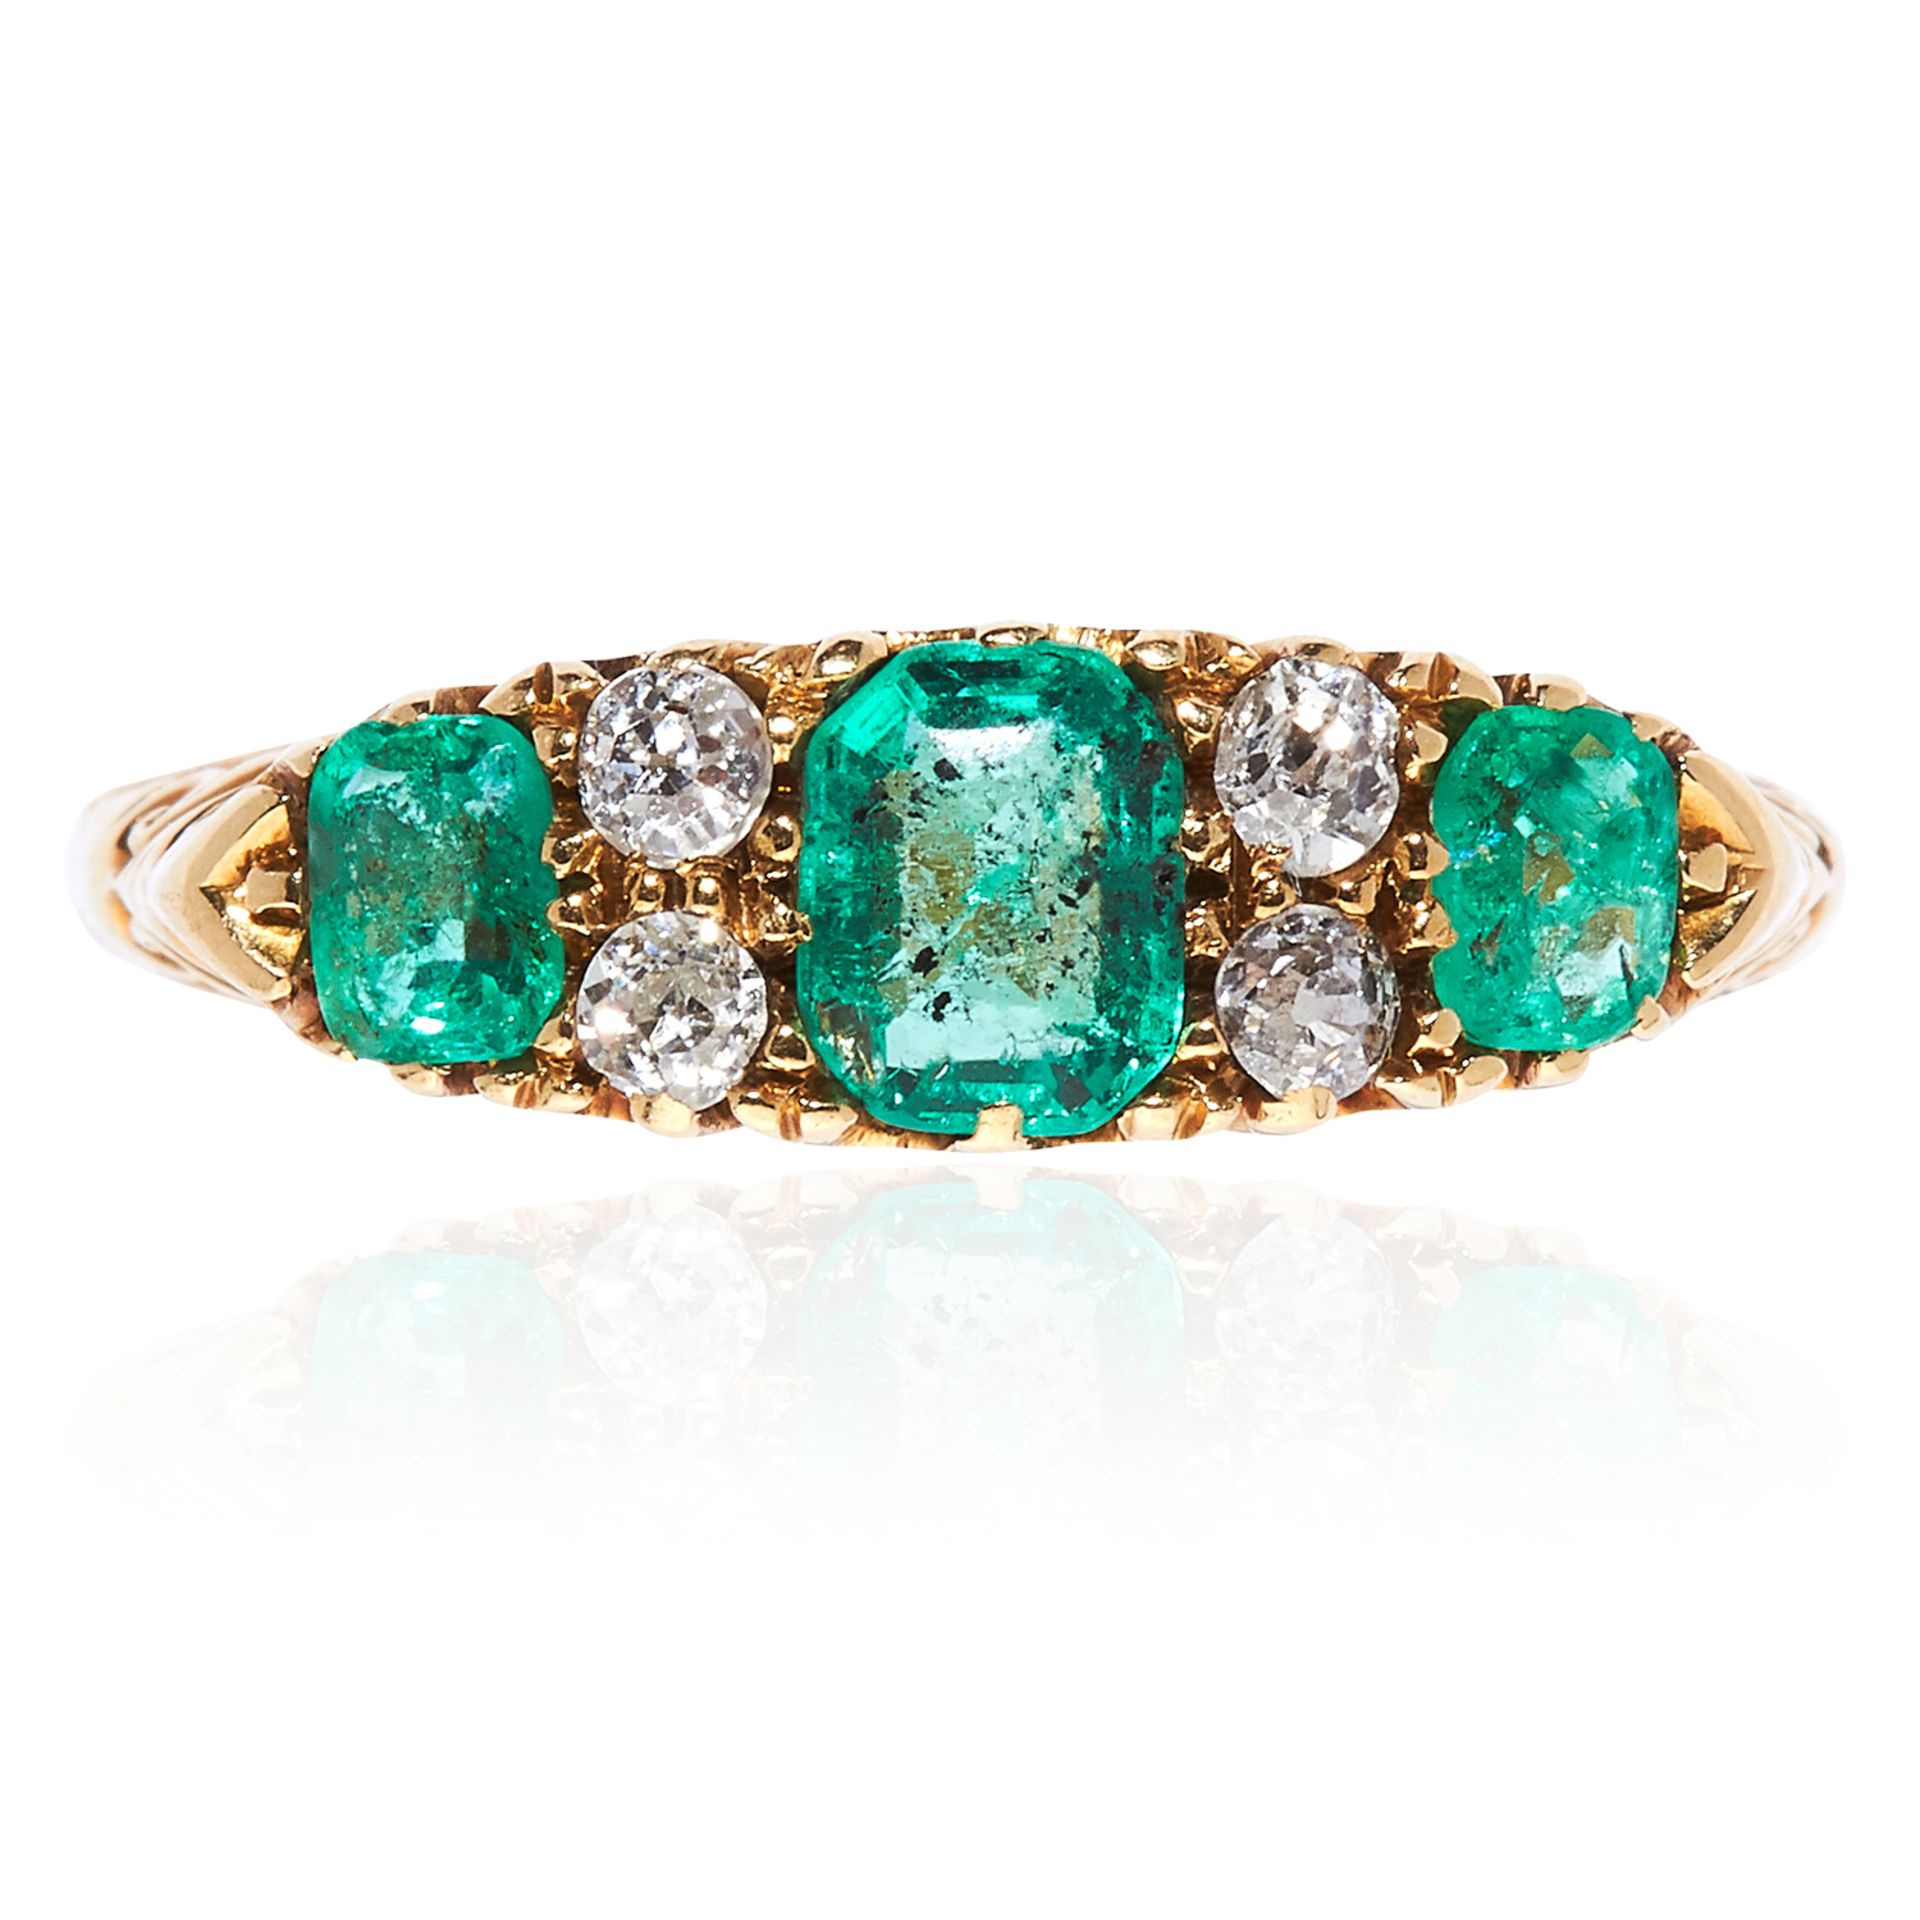 AN ANTIQUE EMERALD AND DIAMOND RING in 18ct yellow gold, set with a trio of step cut emeralds